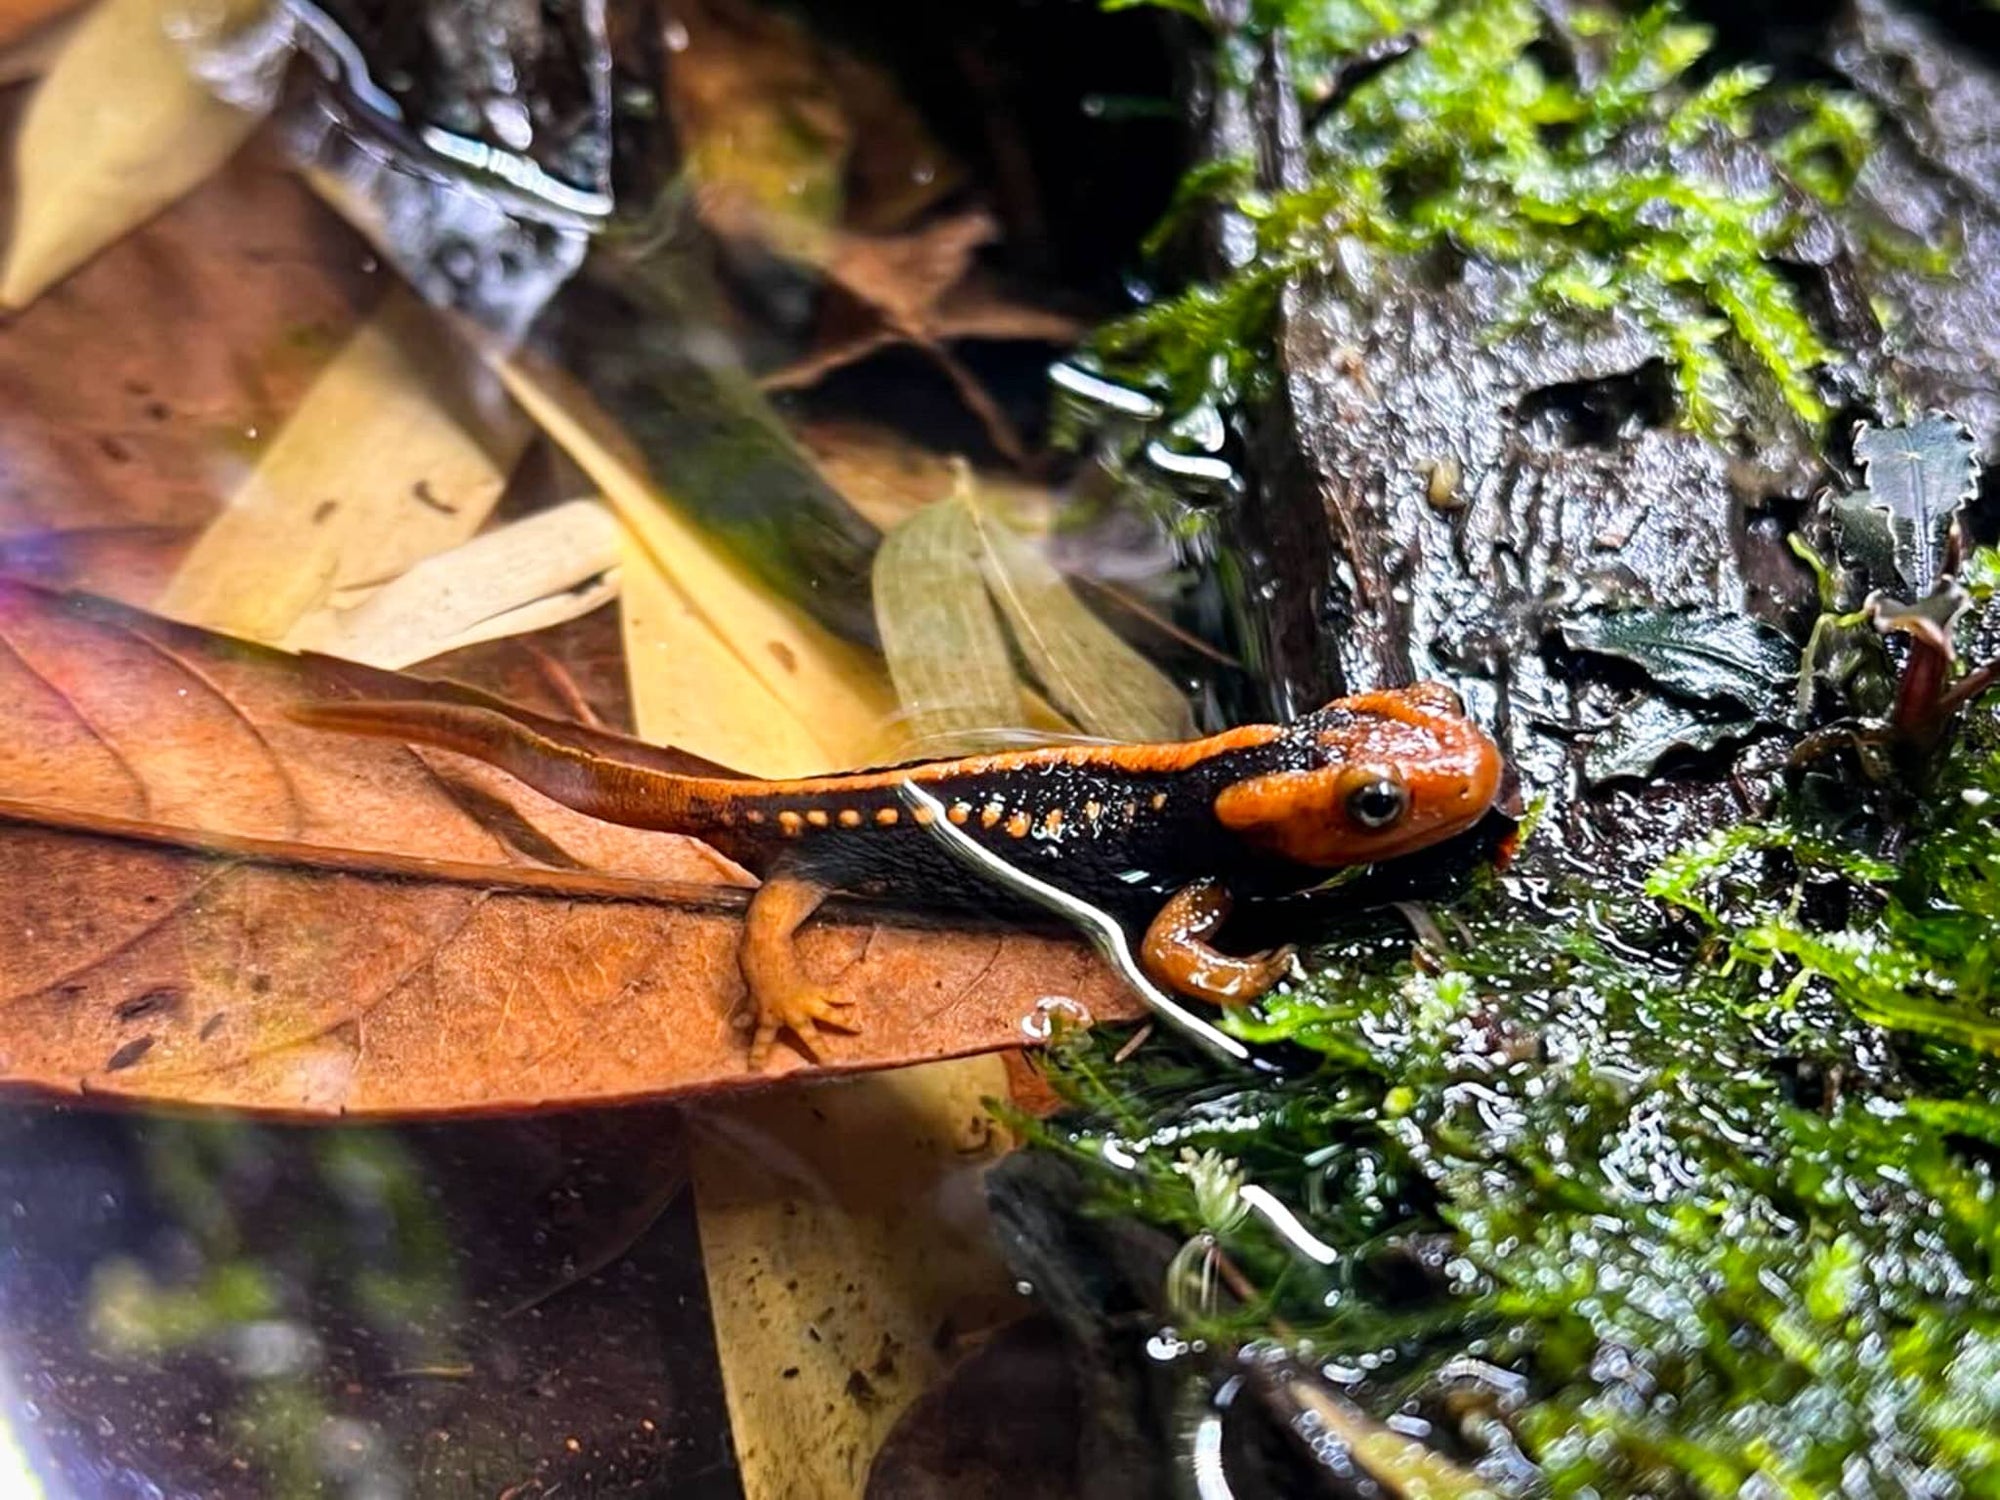 An orange and black newt rests on brown leaf litter in the water at Betta Botanicals.